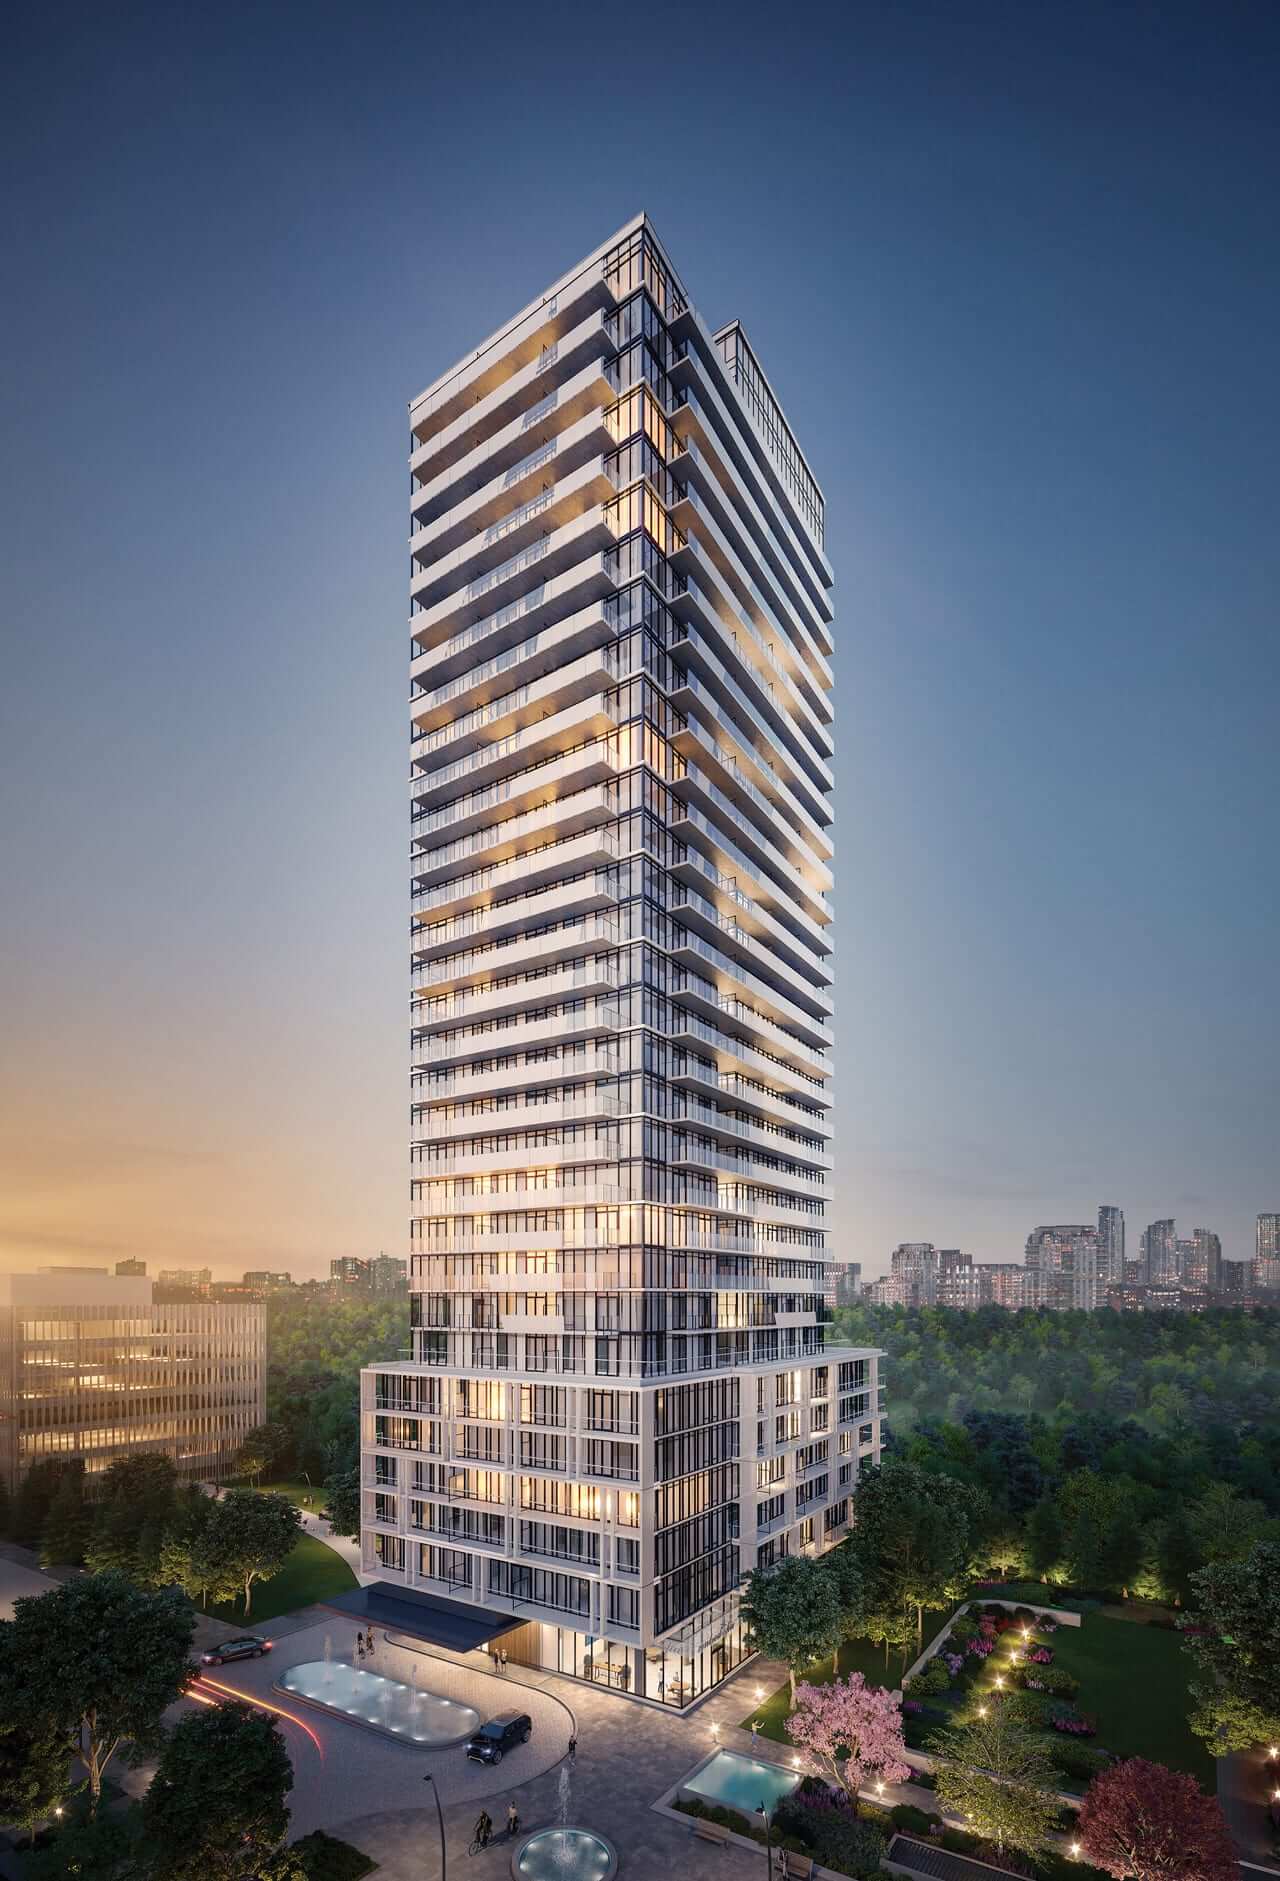 Rendering of The Residences at Central Park Condos exterior full view at night